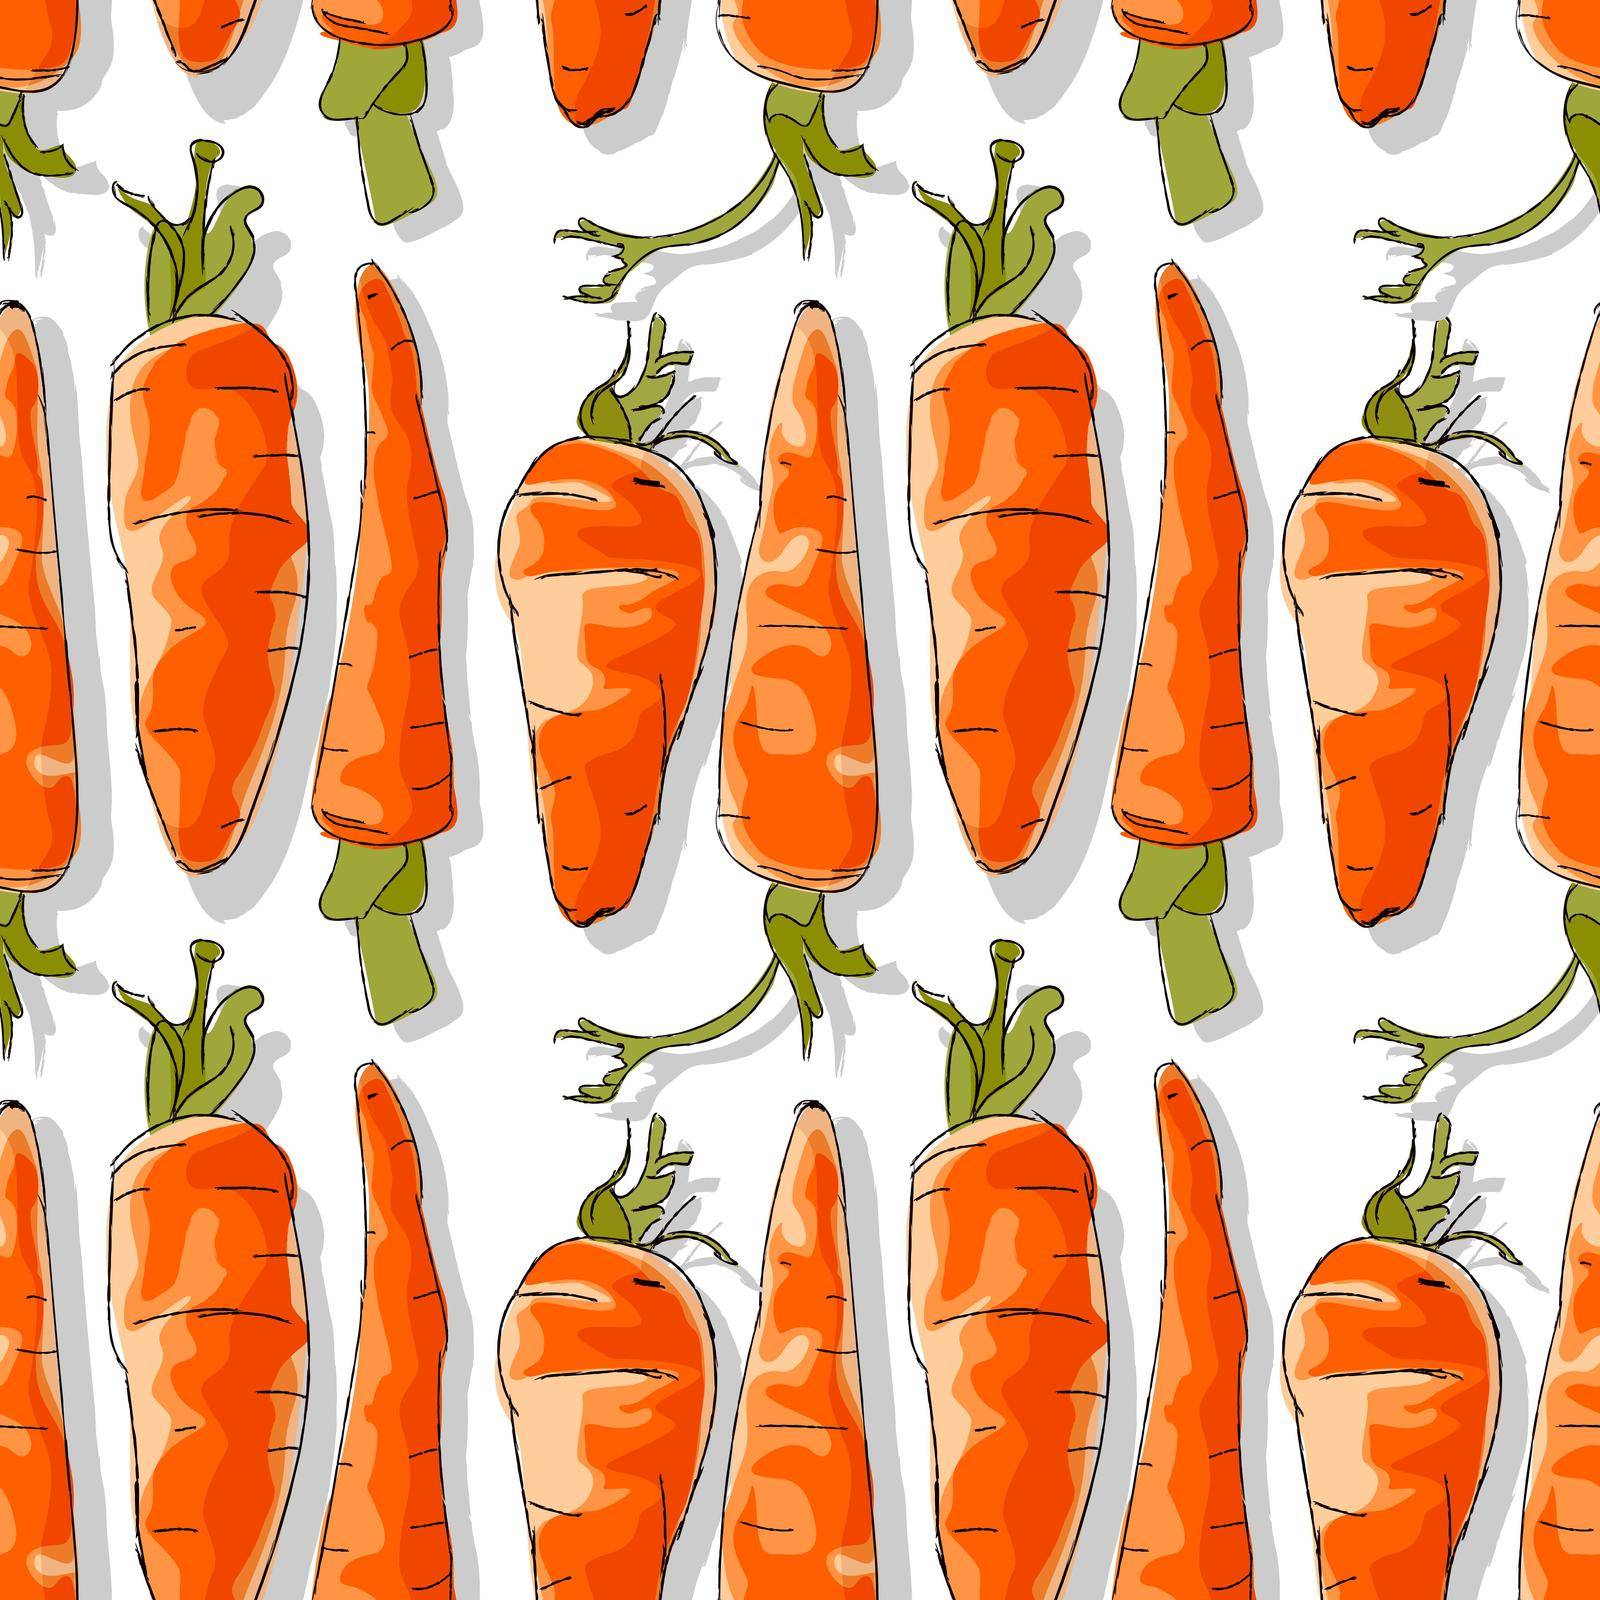 Carrots repeating pattern by Lirch